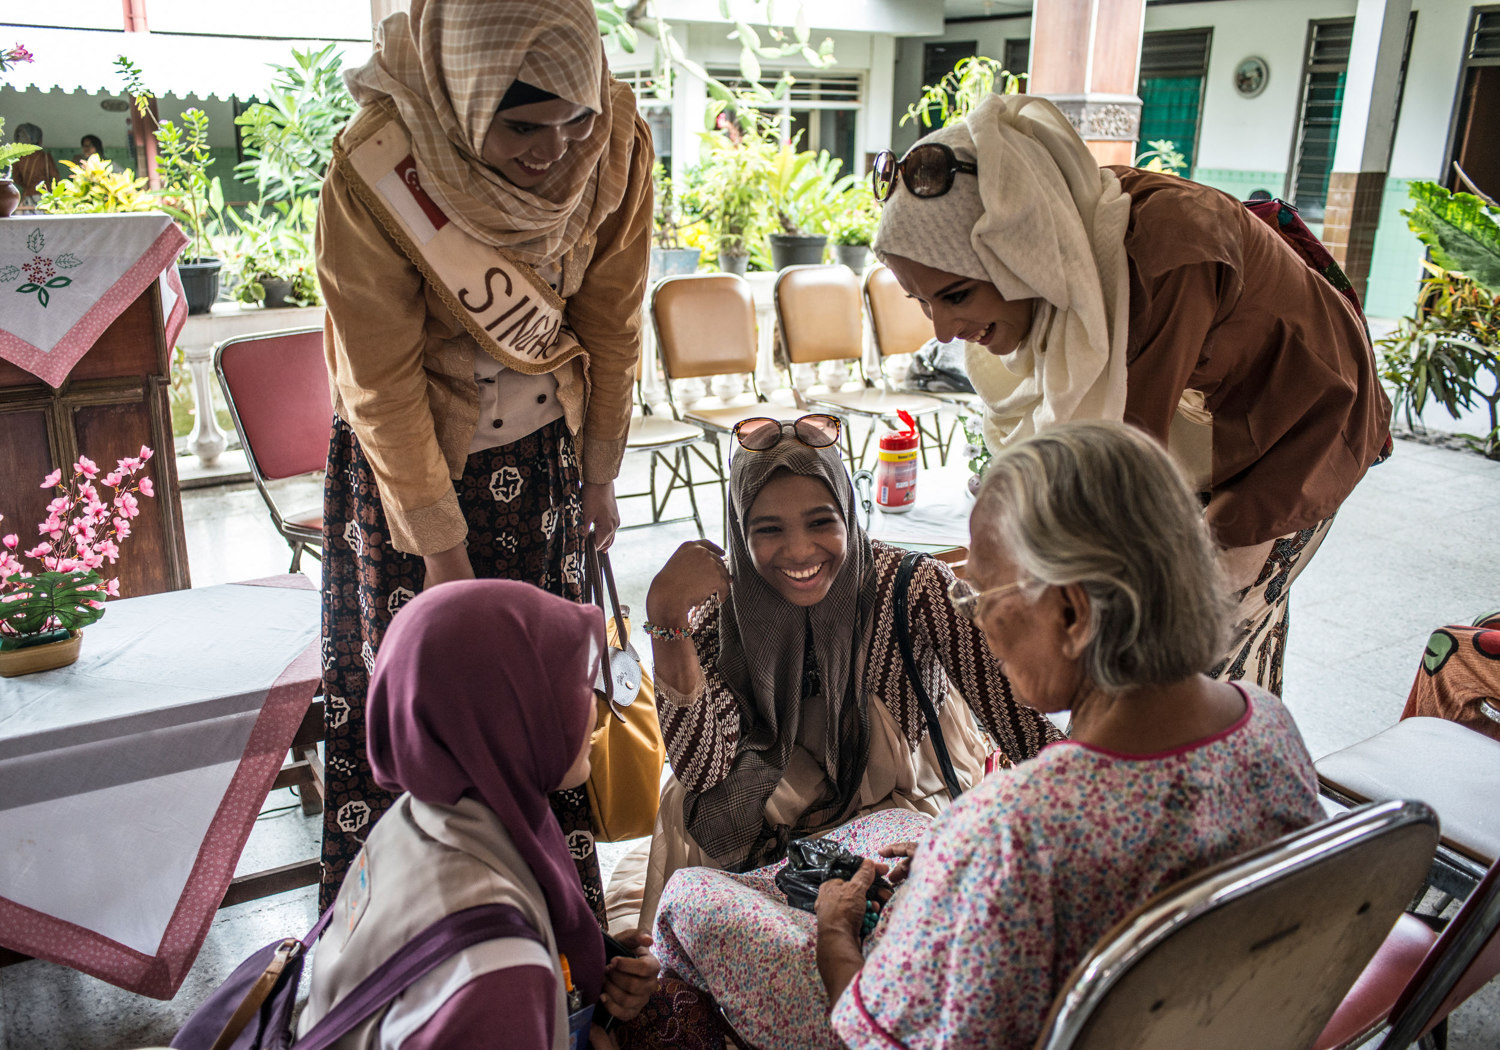  At an elderly home, the girls are tested on their charity and compassion. 
 